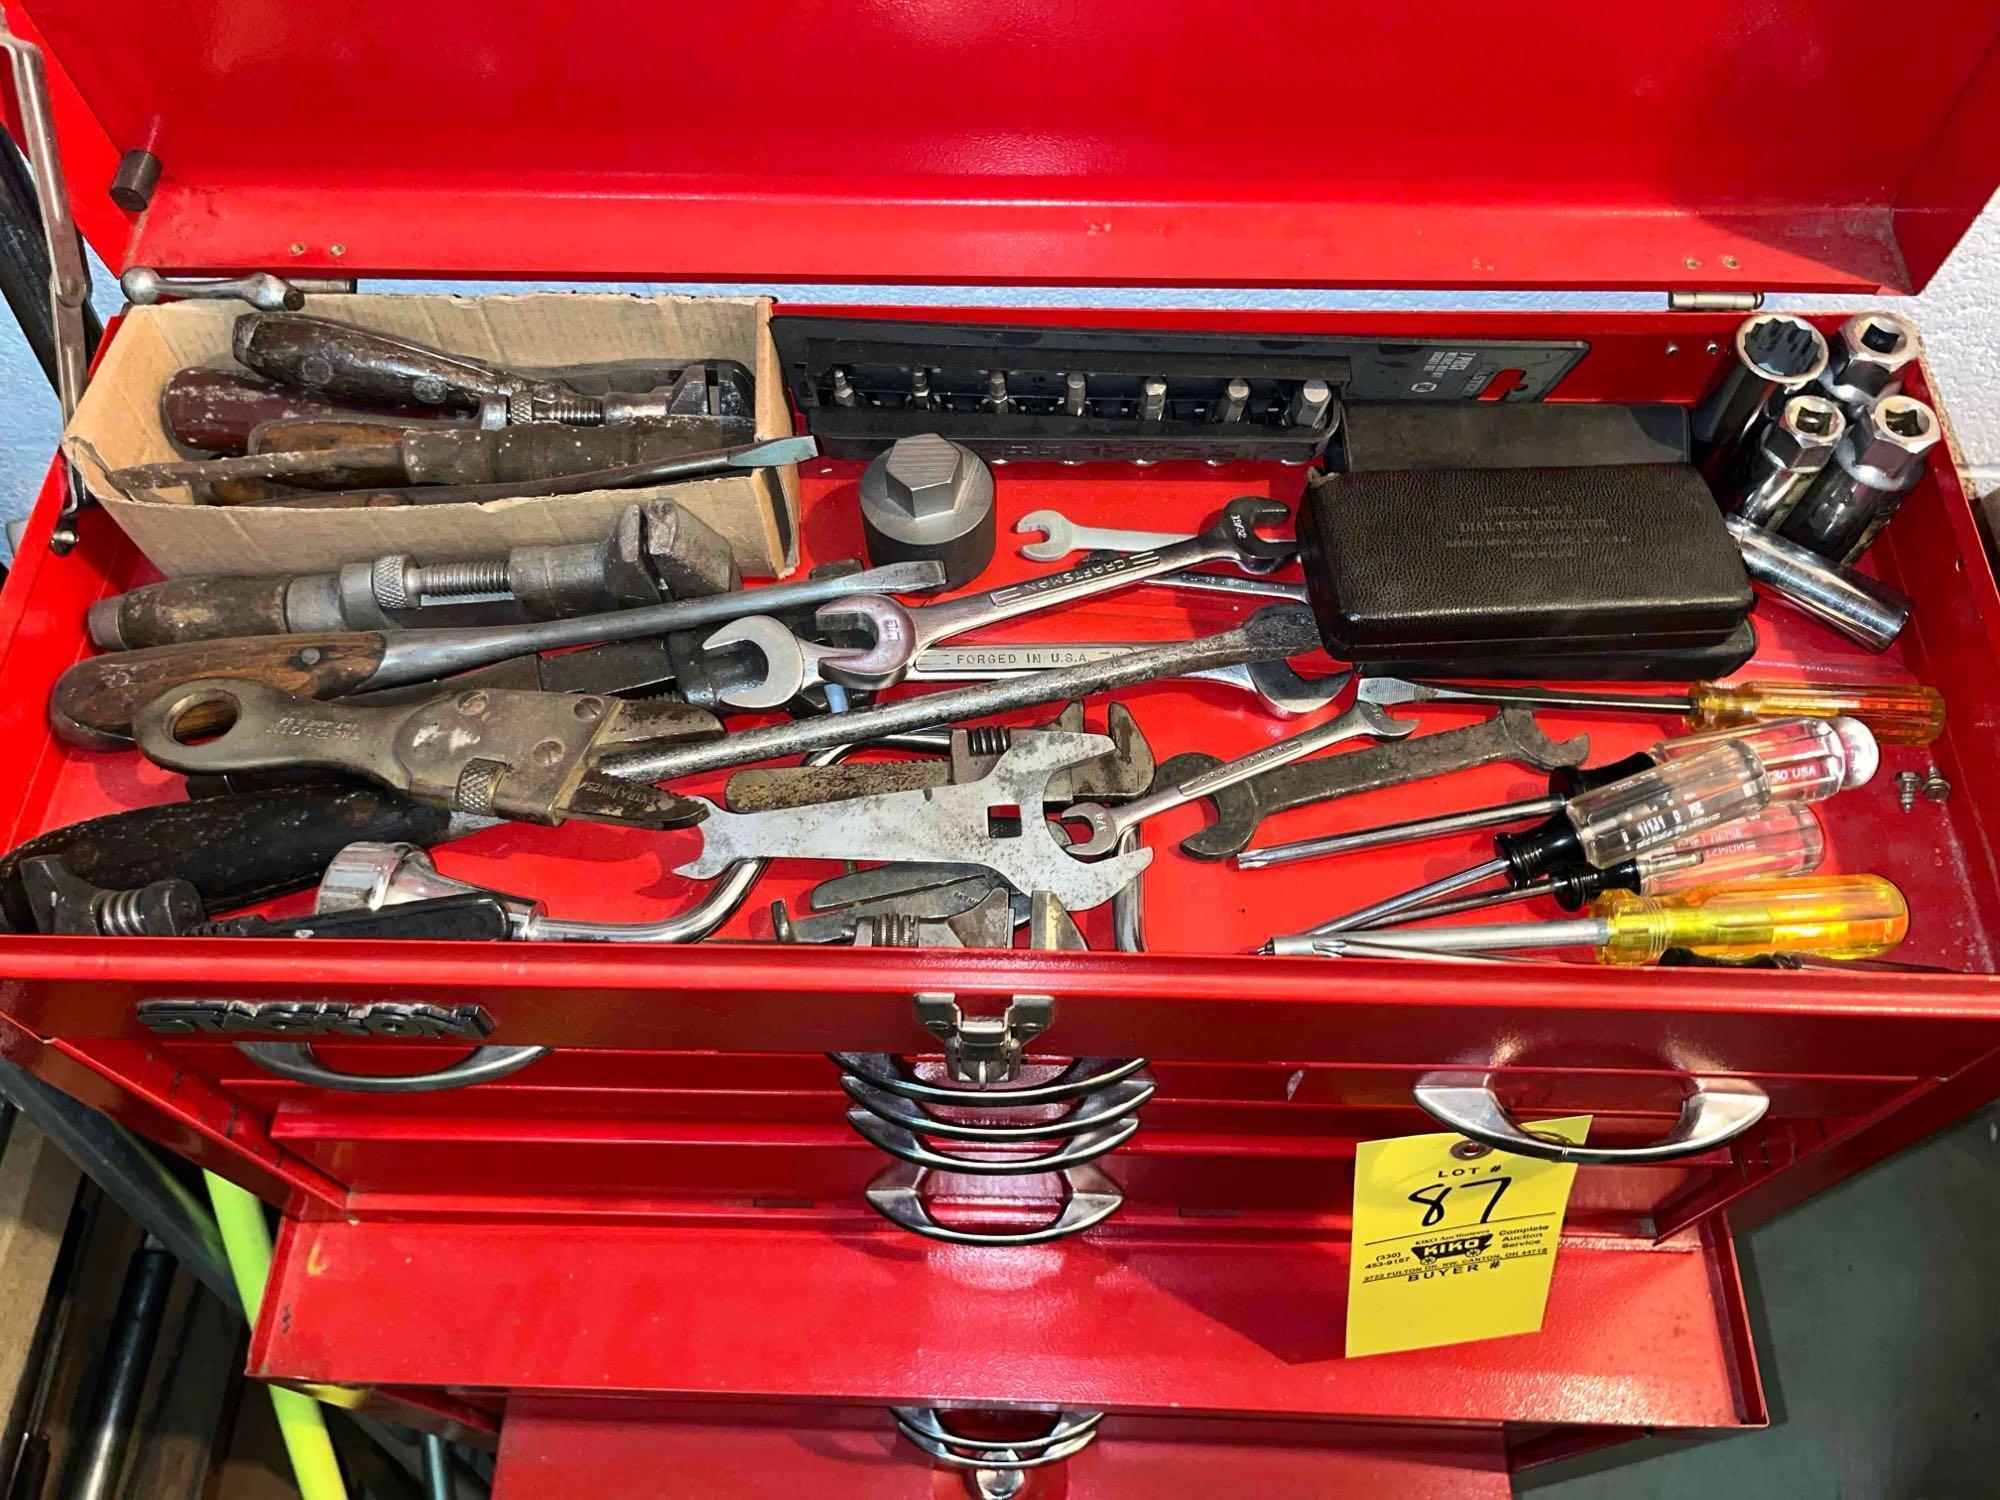 Stack On Tool Box wit Tooling Contents